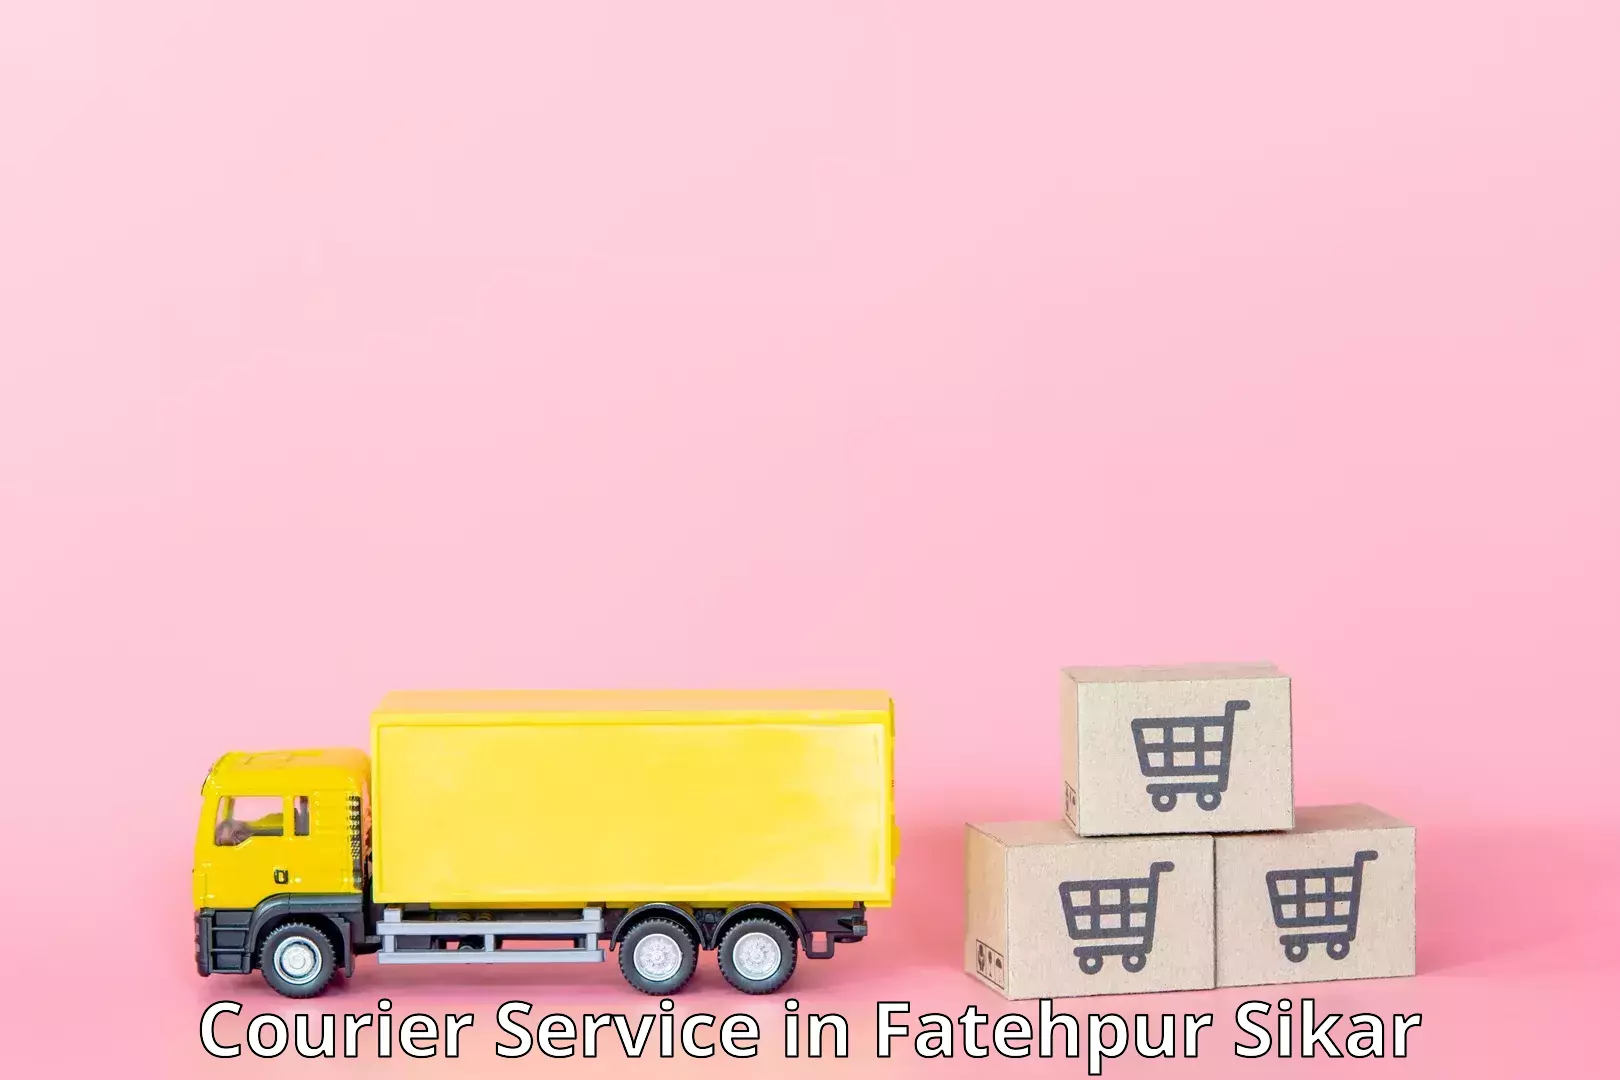 Sustainable courier practices in Fatehpur Sikar